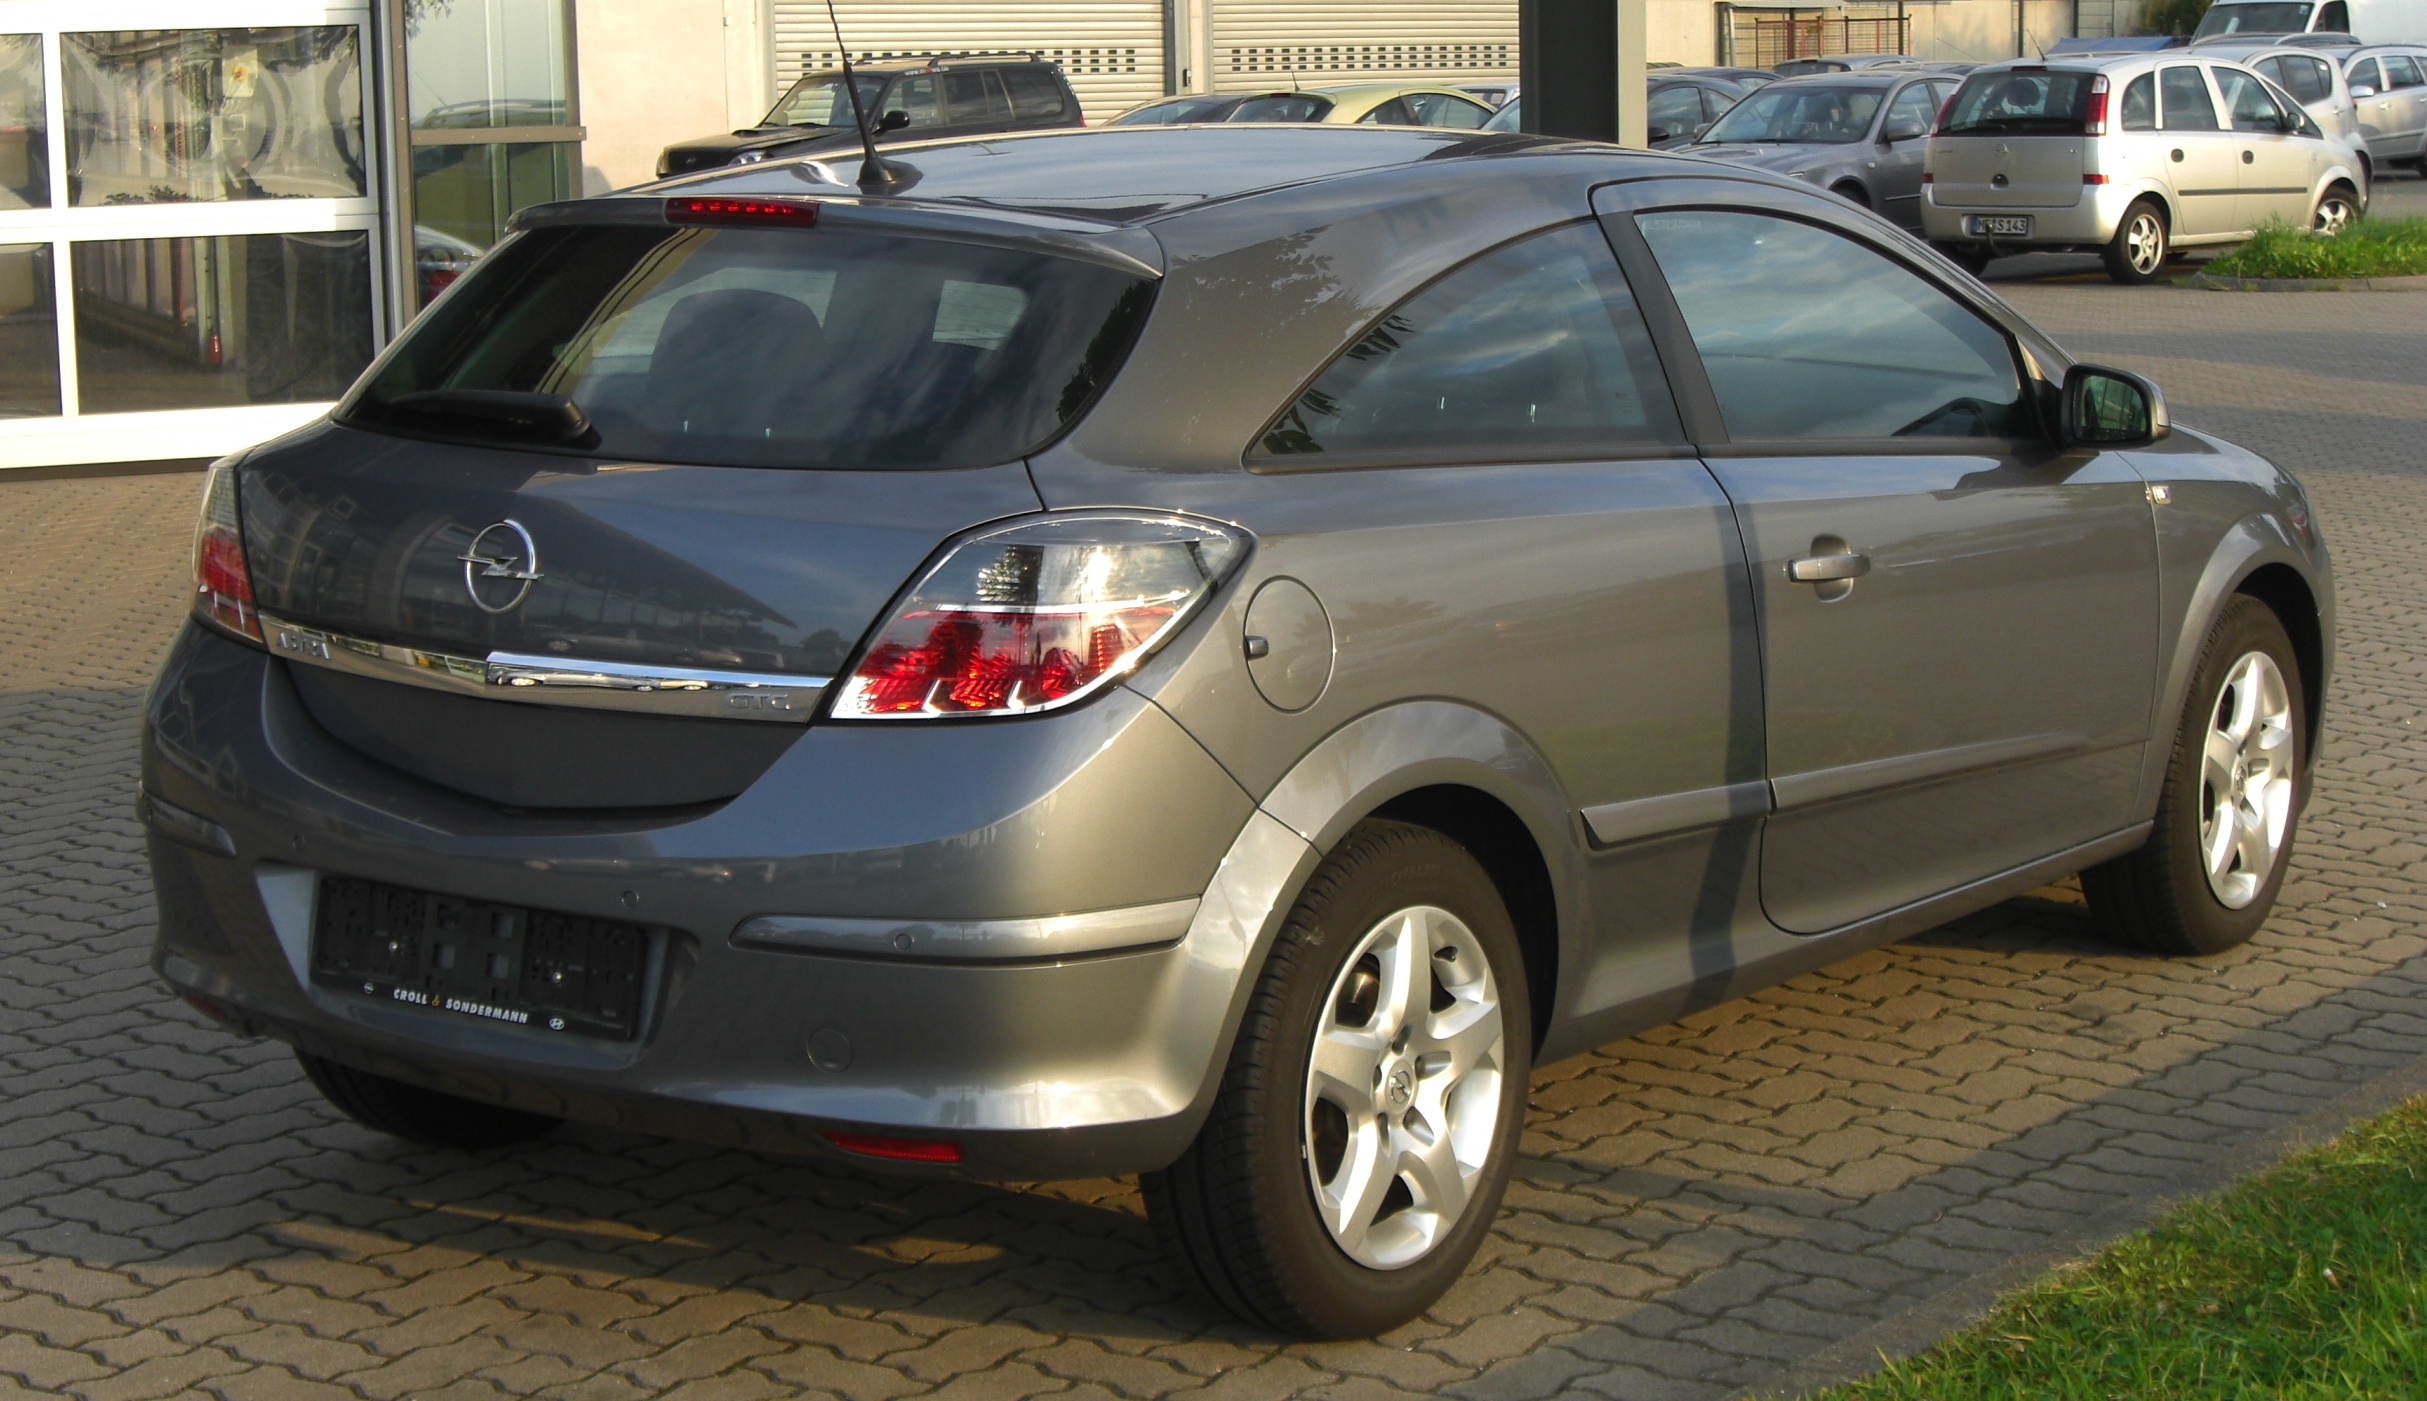 File:Opel Astra H front.jpg - Wikimedia Commons